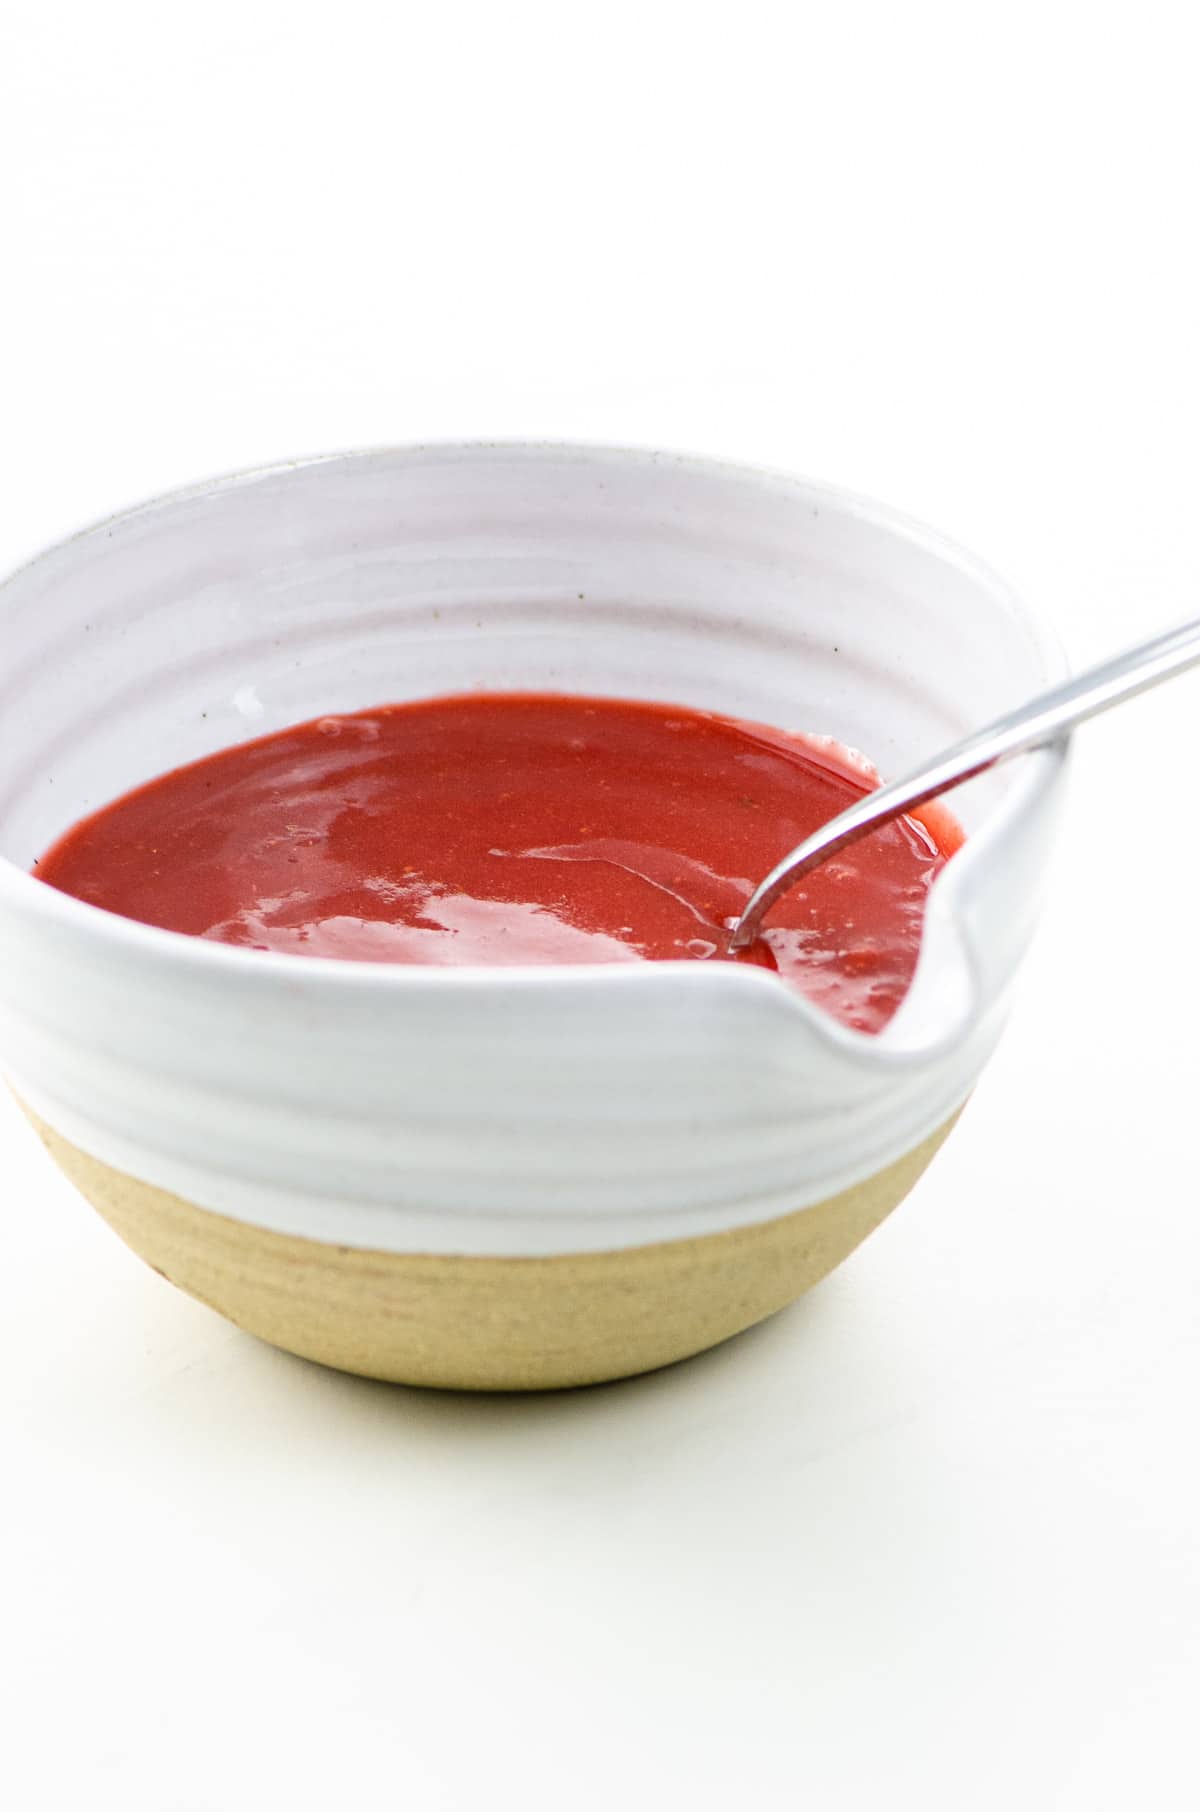 strawberry sauce for cheesecake in a bowl with a spoon